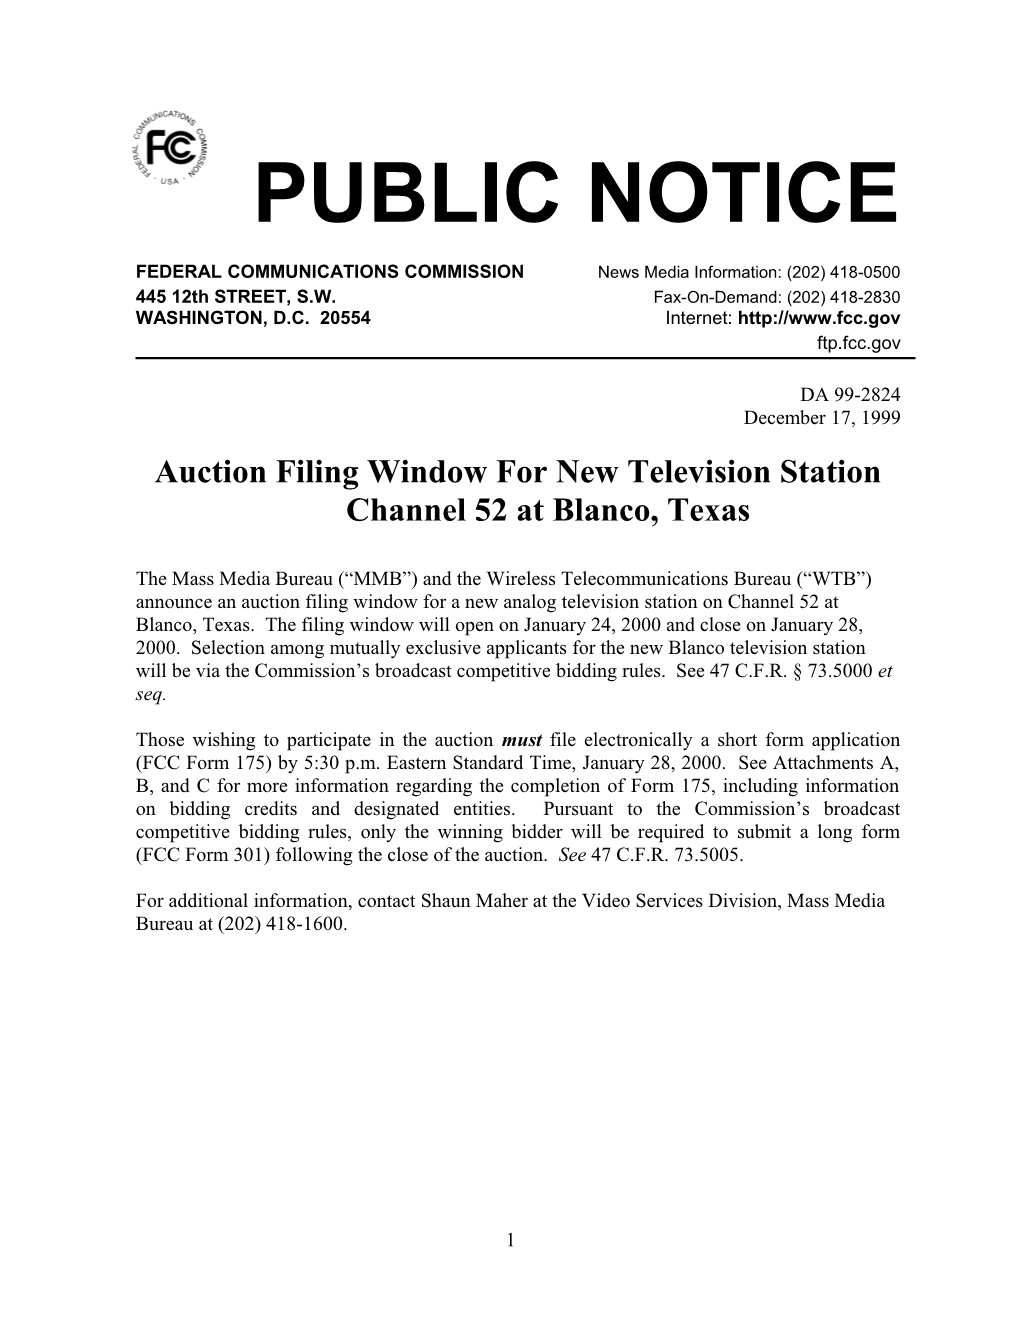 Auction Filing Window for New Television Station Channel 52 at Blanco, Texas